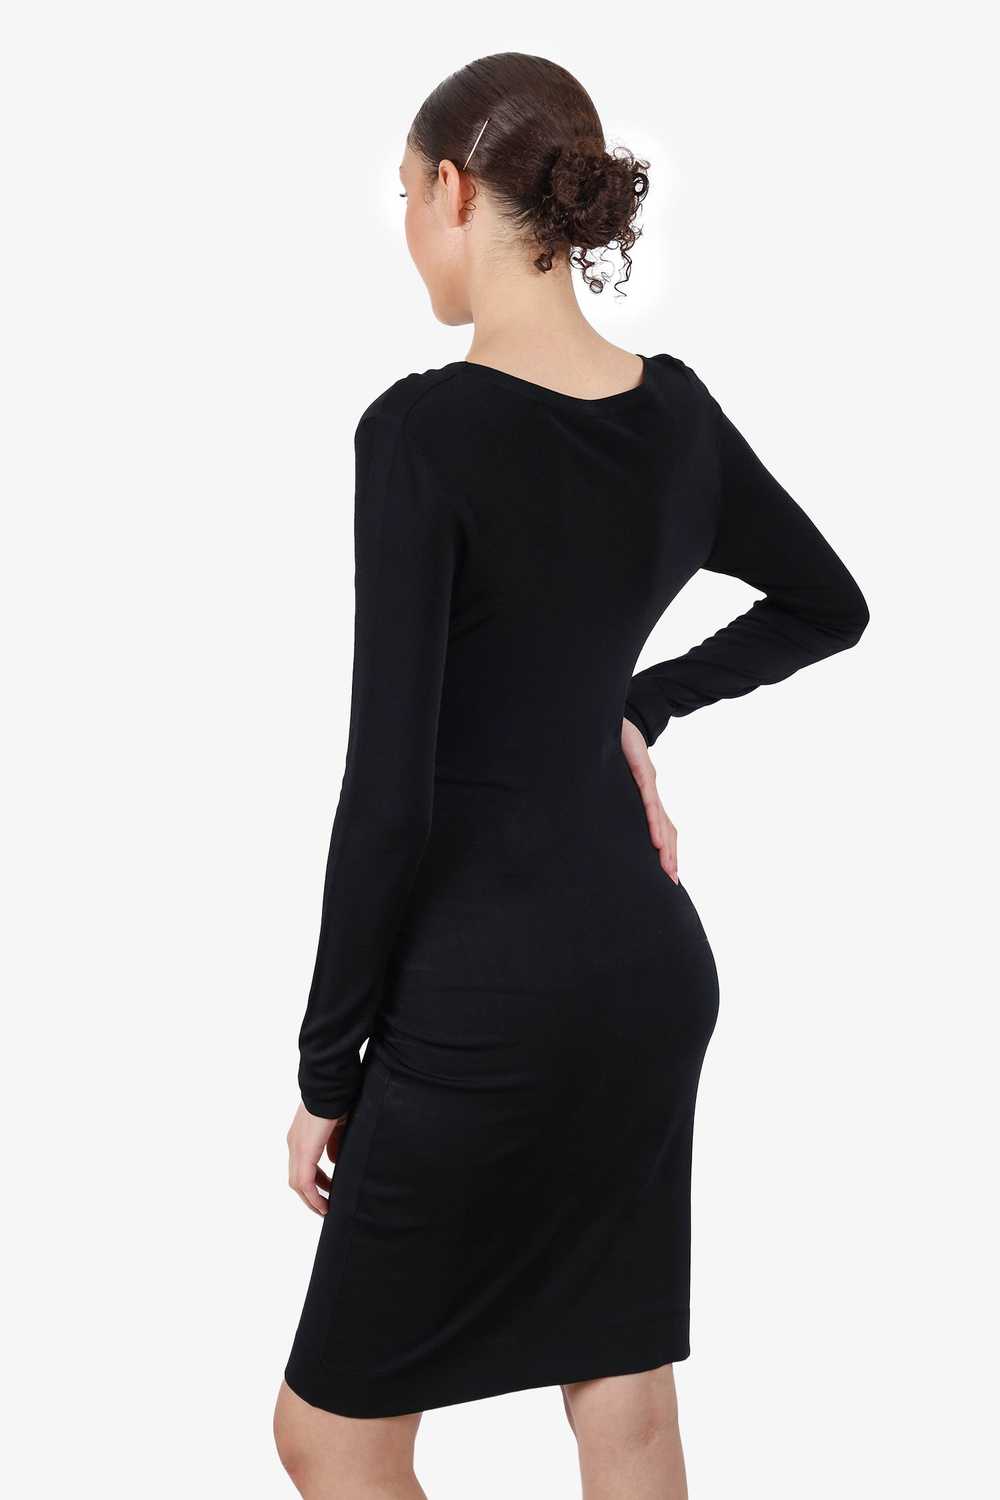 Gucci By Tom Ford Black Open Front Midi Dress Siz… - image 5